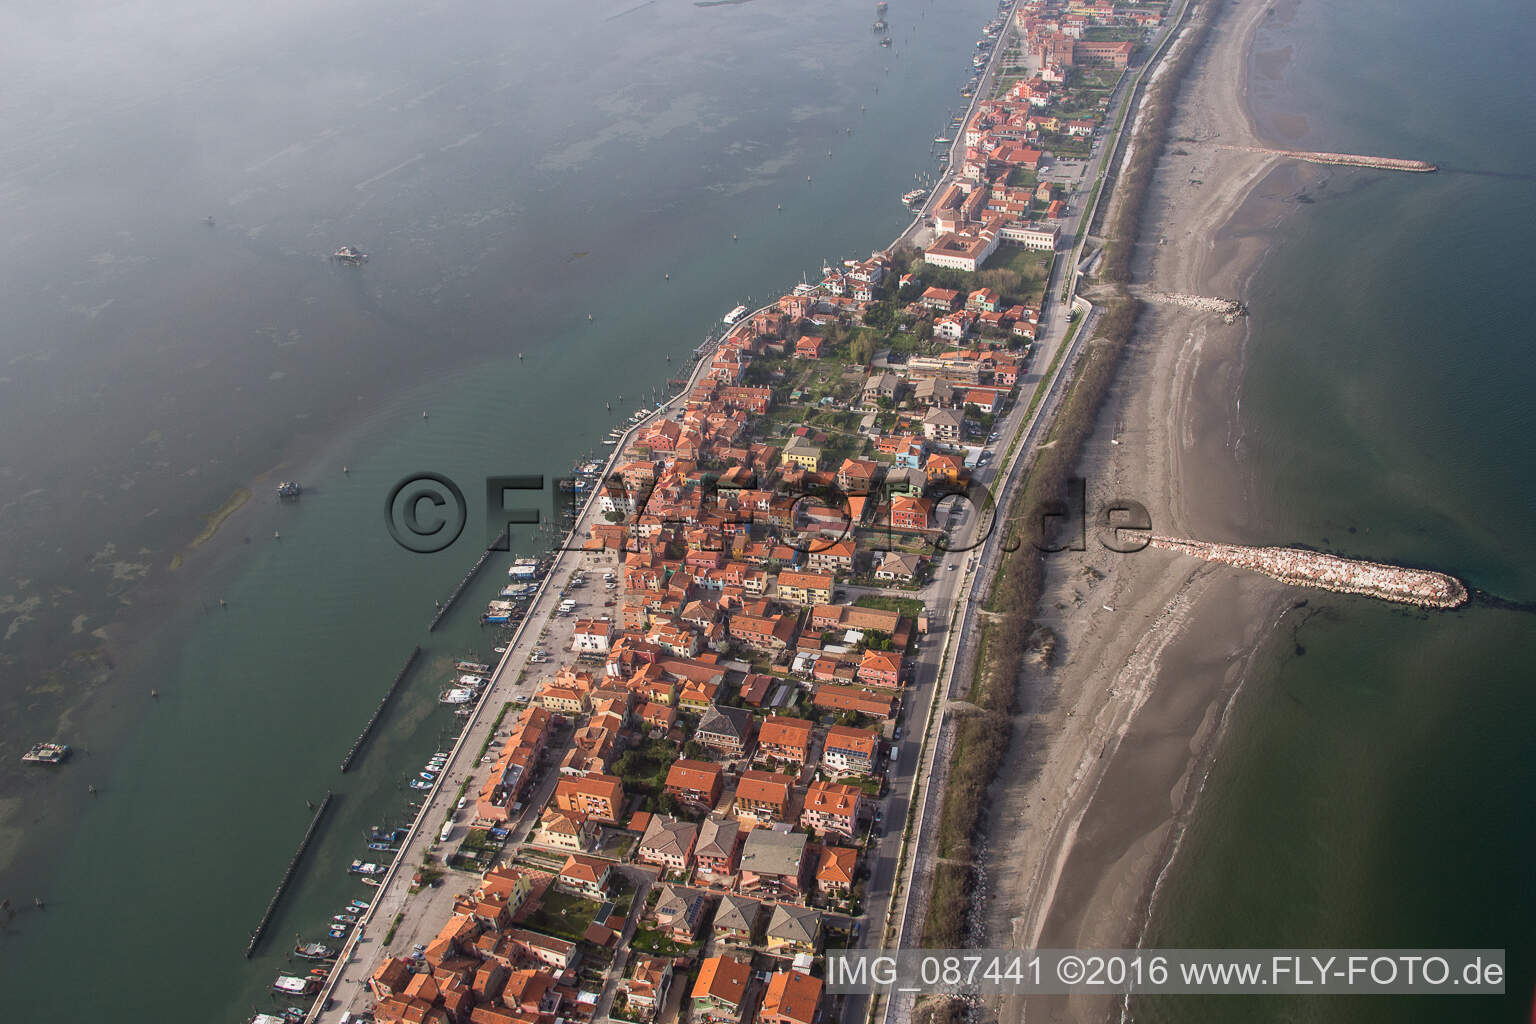 Settlement area in the district Pellestrina in Venedig in Venetien, Italy viewn from the air